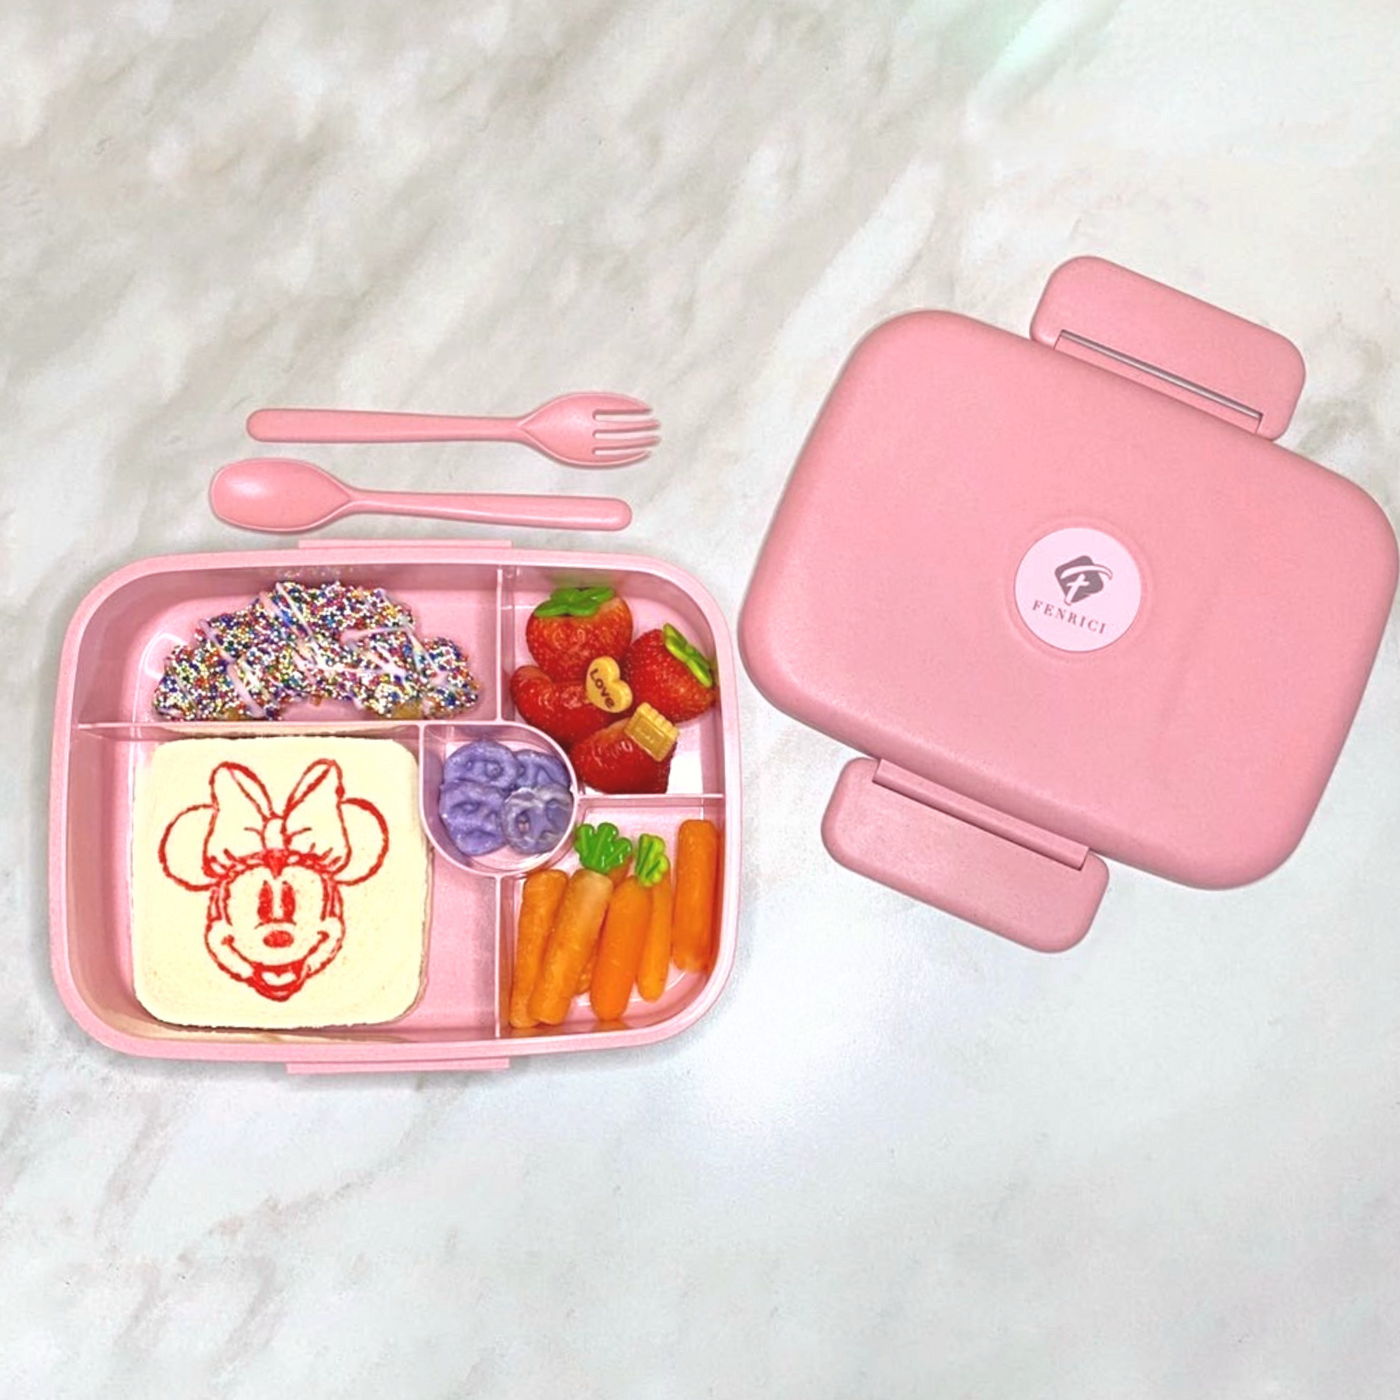  Fenrici Bento Lunch Box For Girls & Teens, Made with  Plastic-Free Wheat Straw, Utensils Included, 5 Compartments, Best Lunch Box,  BPA-Free Bento, Microwave and Dishwasher Safe, Pink: Home & Kitchen